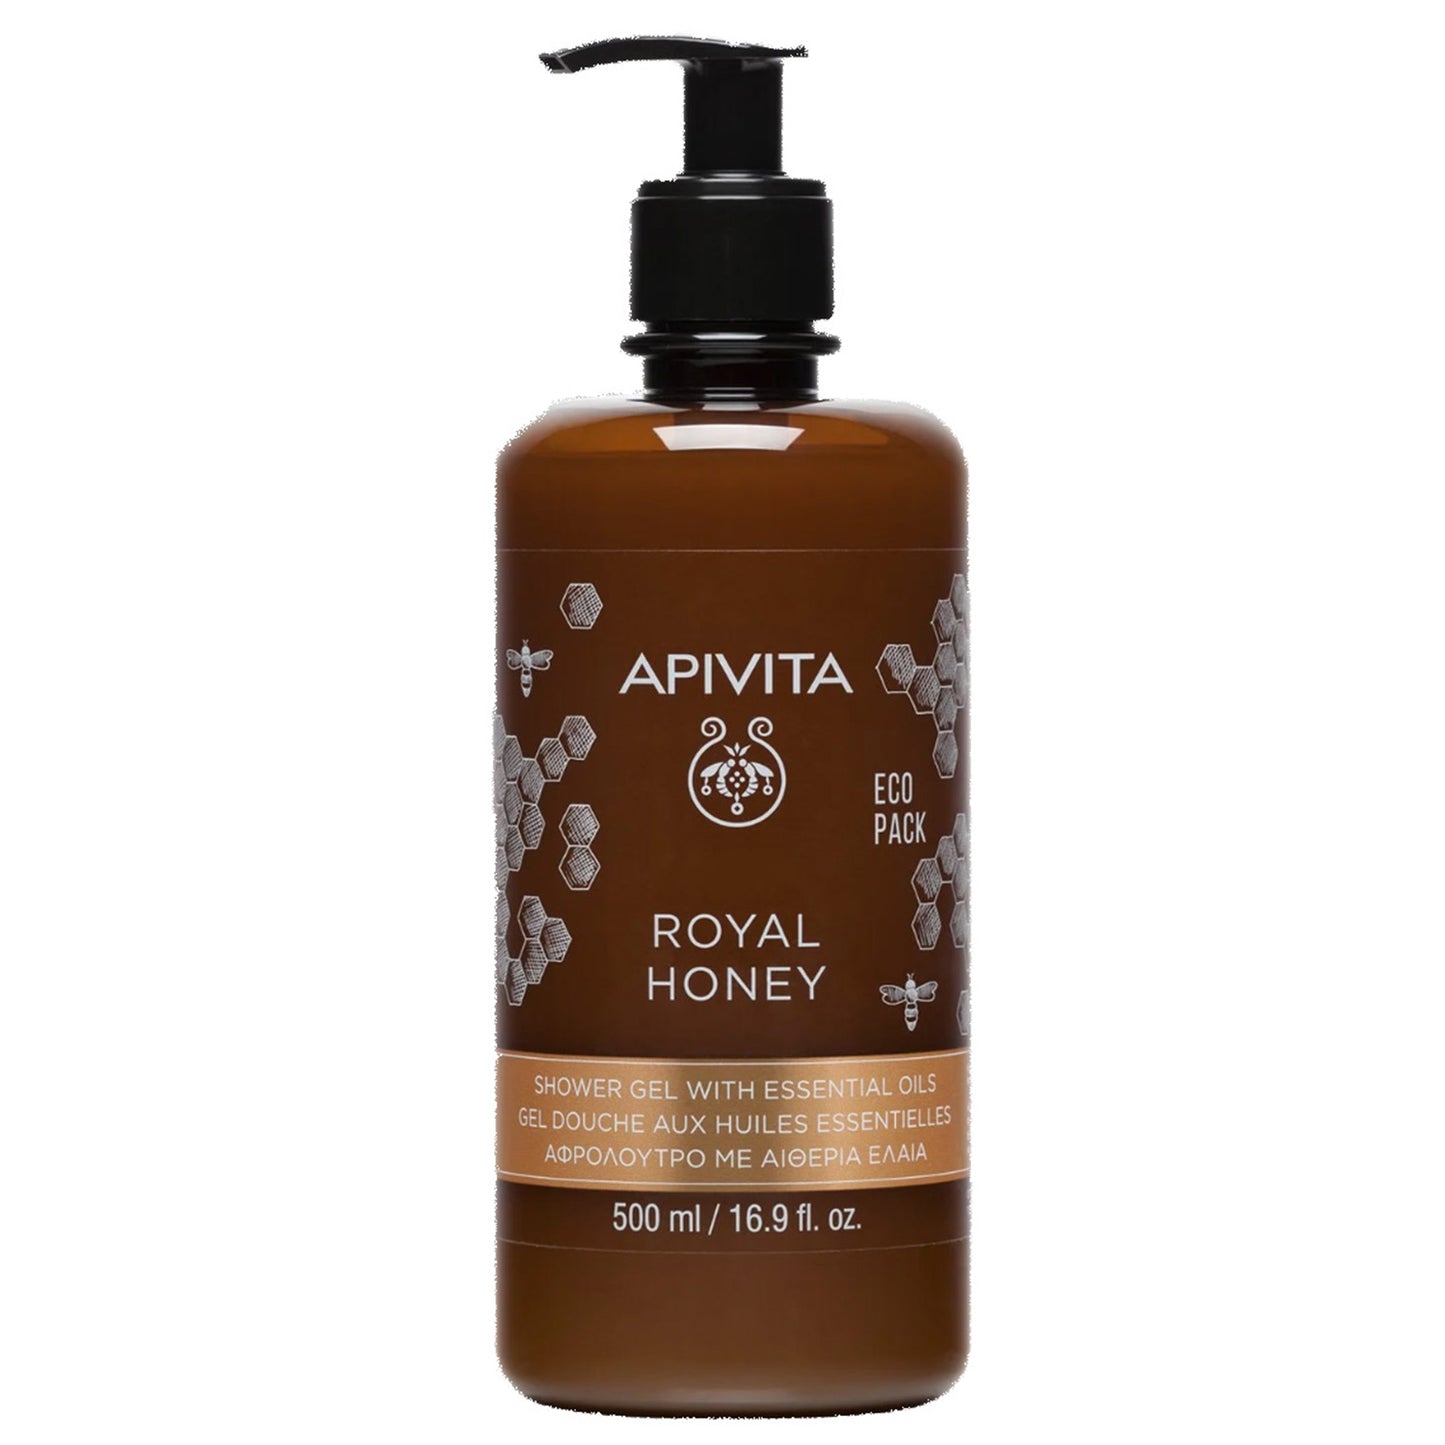 Apivita Royal Honey shower gel boasts a complex 97% natural origin formulation. Lusciously creamy and rich, the gel hydrates and moisturises dry skin, with the added benefits of thyme honey. It cleanses and nourishes without stripping, leaving behind a soft and supple sensation. 